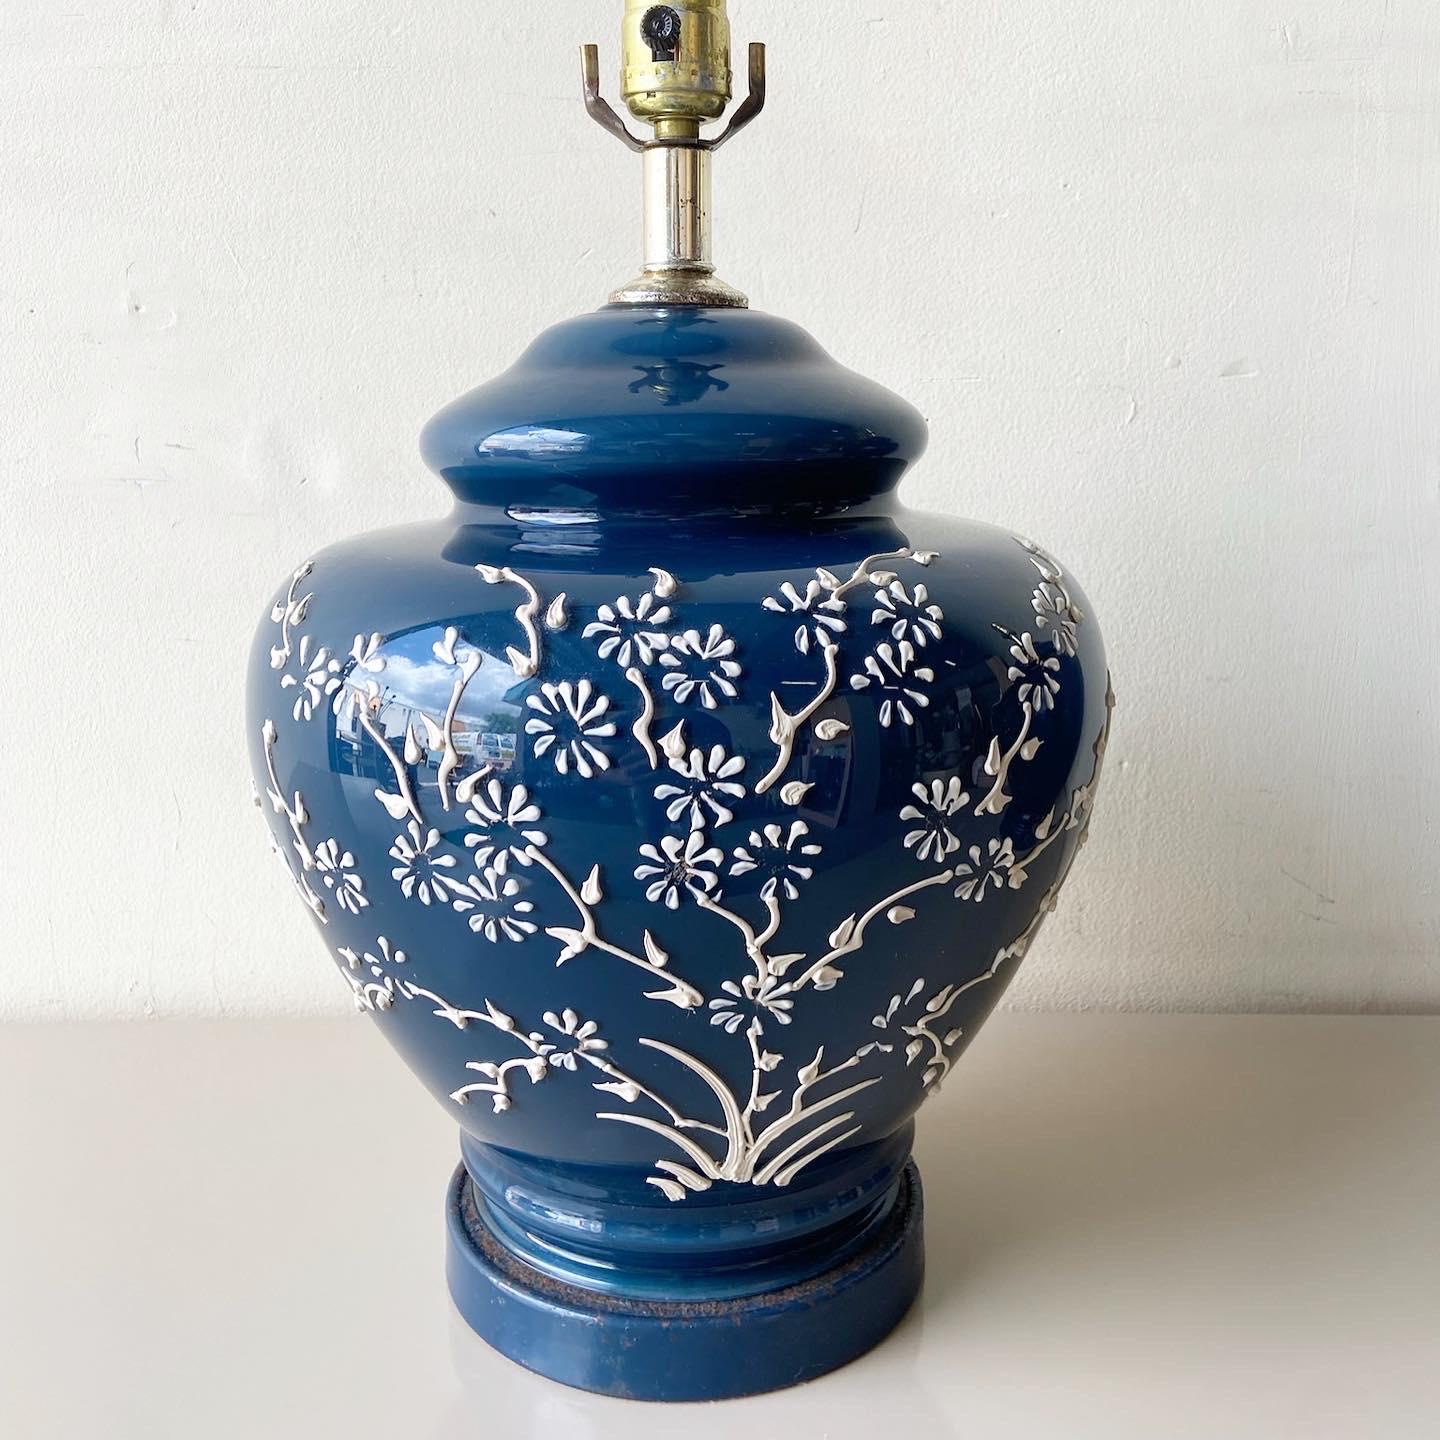 Navy Blue and white Chinese ginger jar lamp is delightful with white blossoms and branches painted on.
